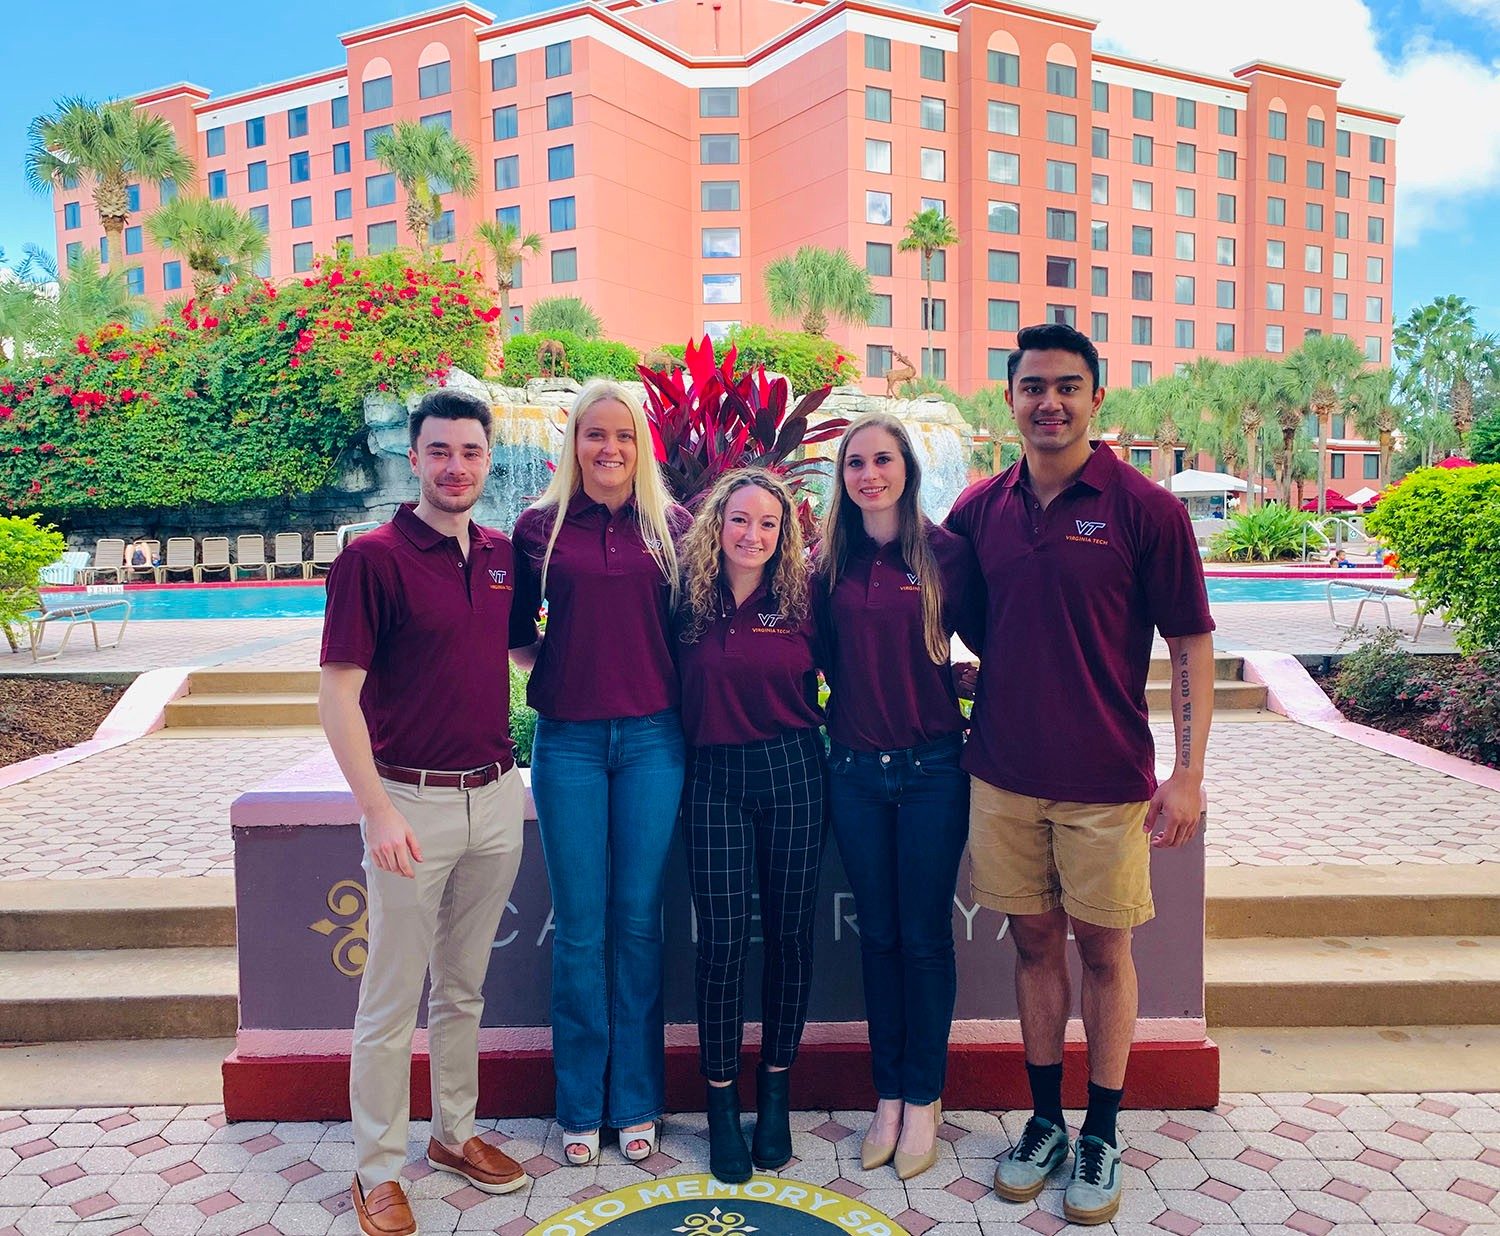 The 2019 Sales Competition Team competed in this year's International Collegiate Sales Competition held in Orlando, Florida (from left to right): Zach Treiber, Taylor Buckner, Morgan Curington, Carrie Rock, and Shashwot KC. 